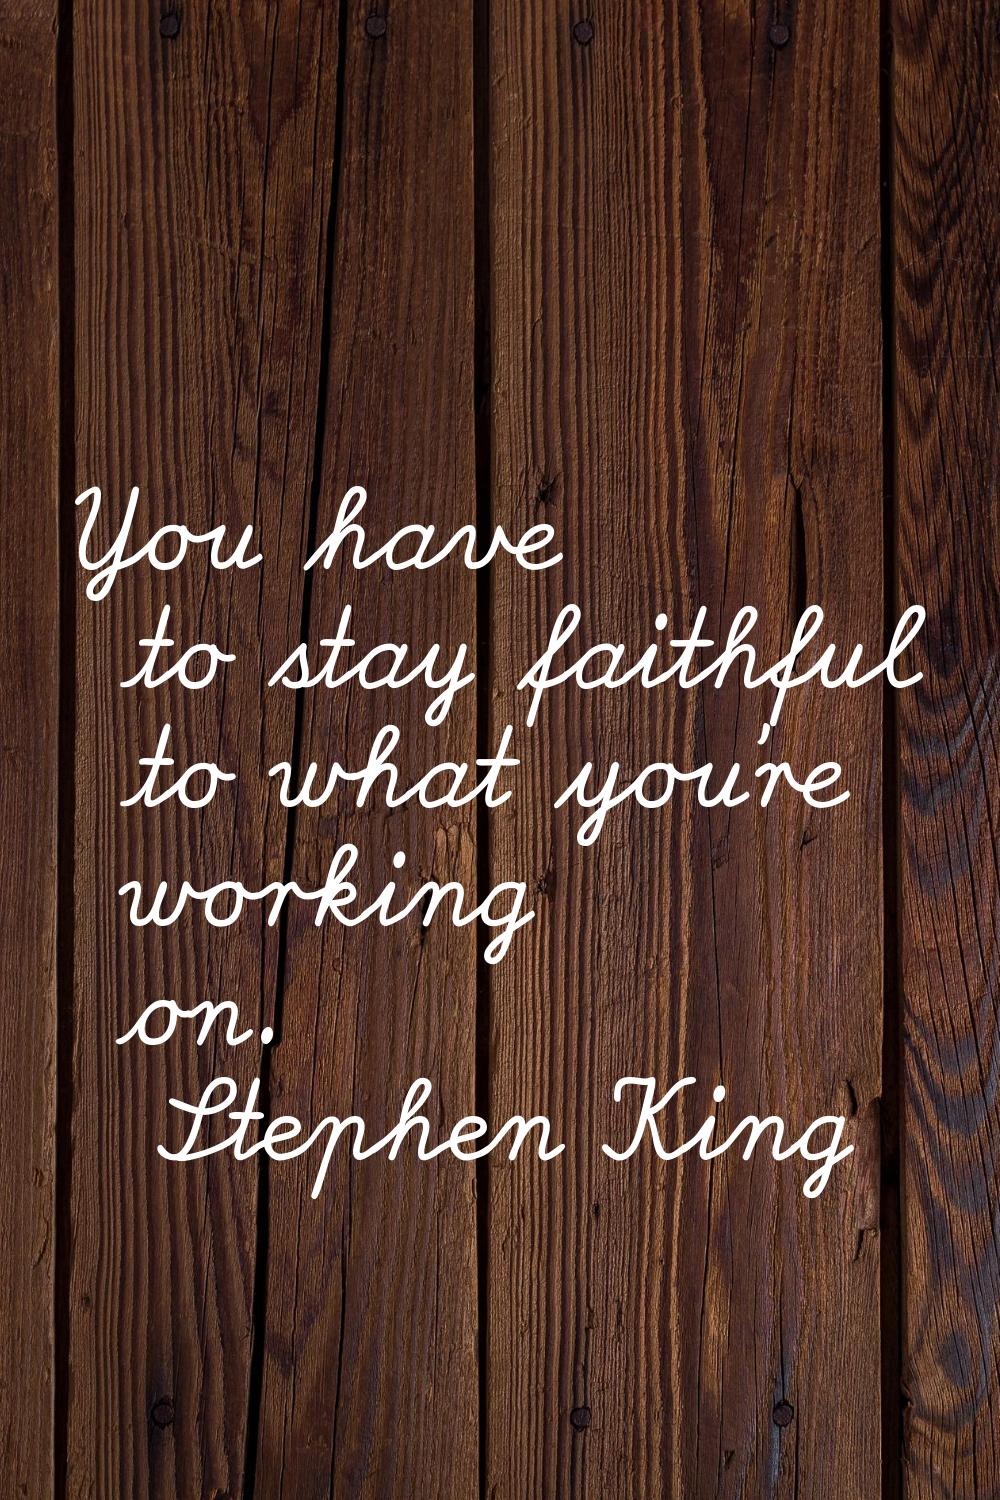 You have to stay faithful to what you're working on.